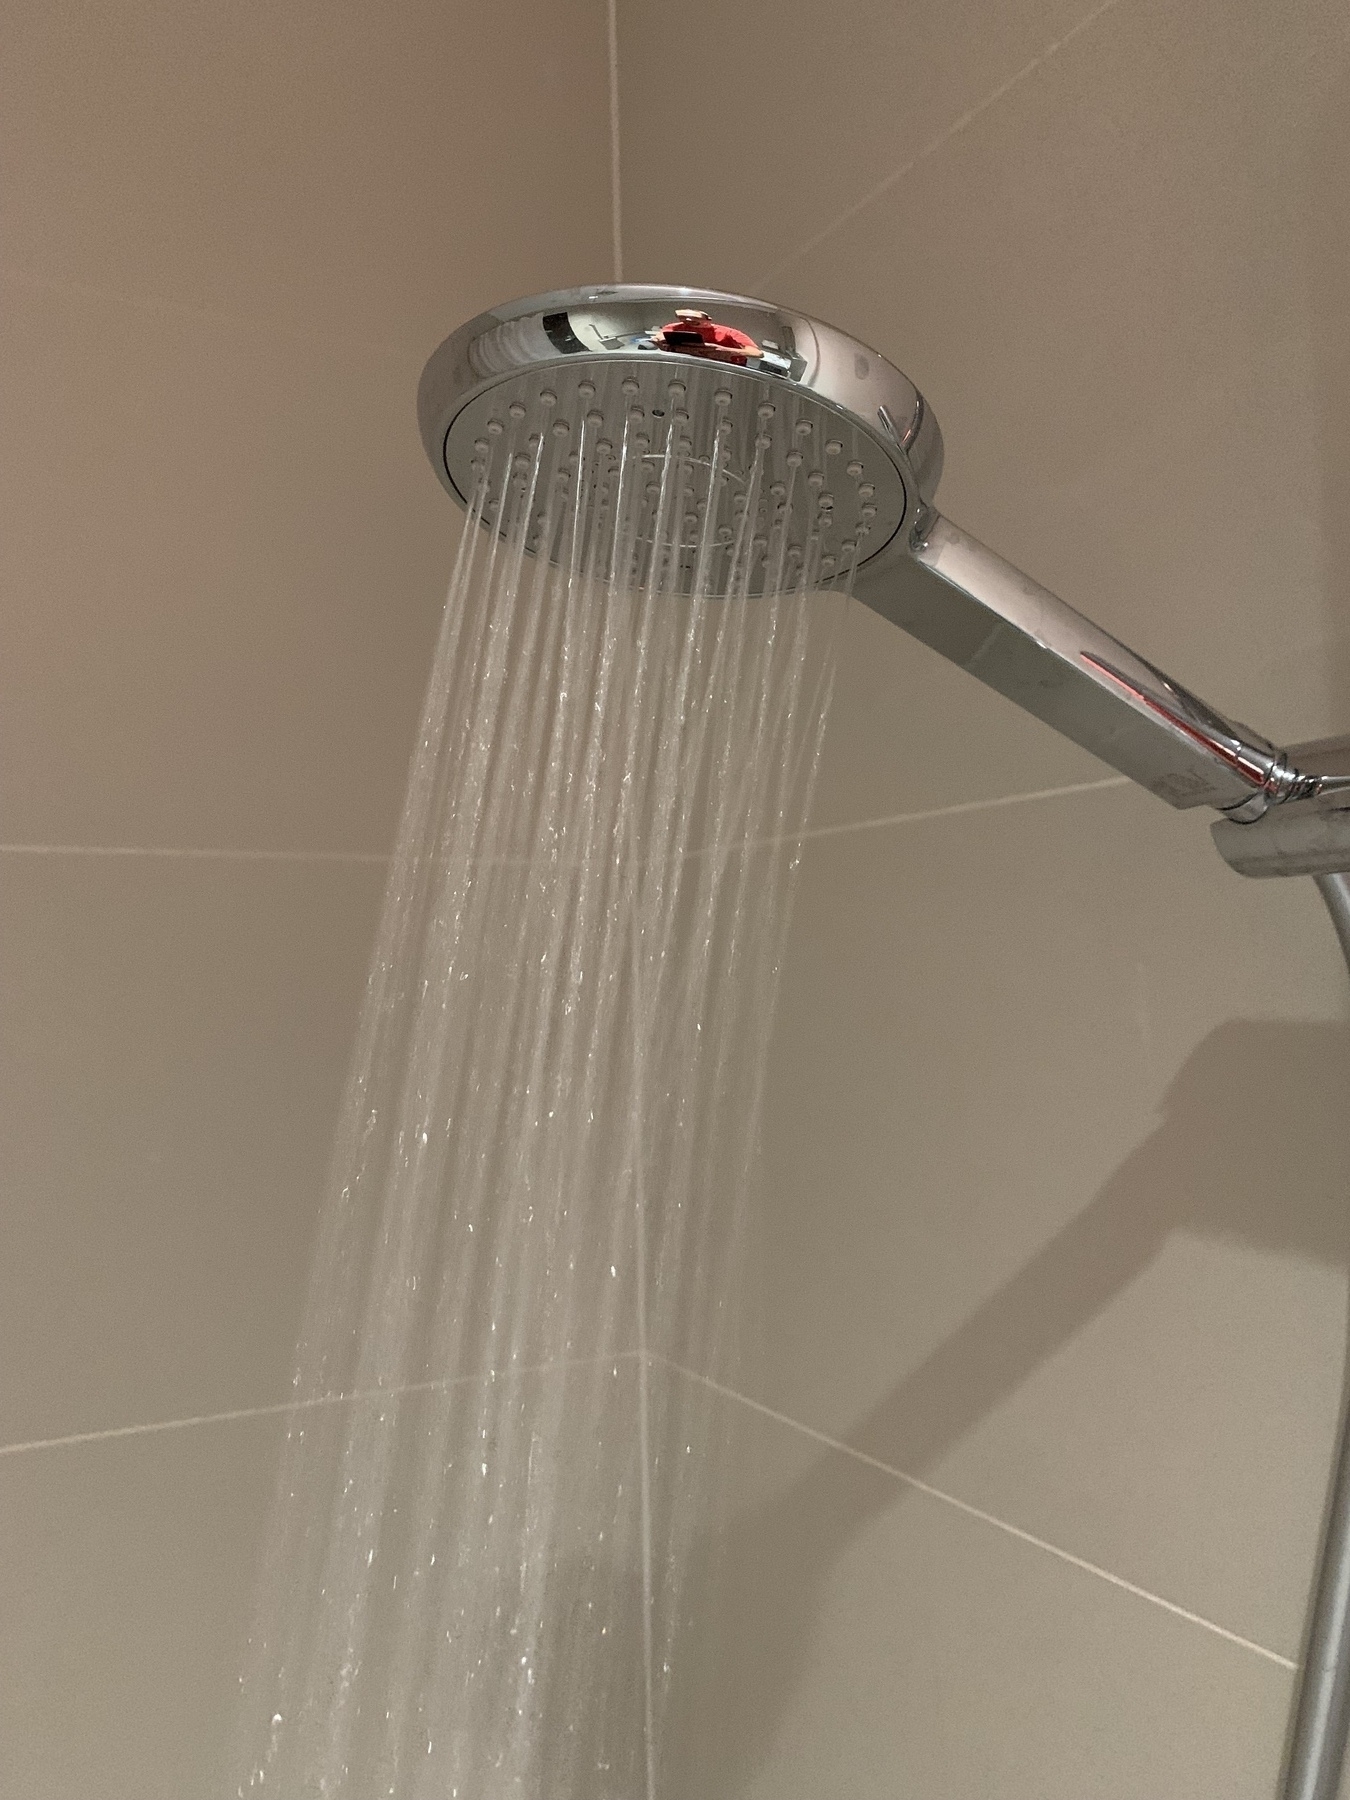 Water falling from a shower head